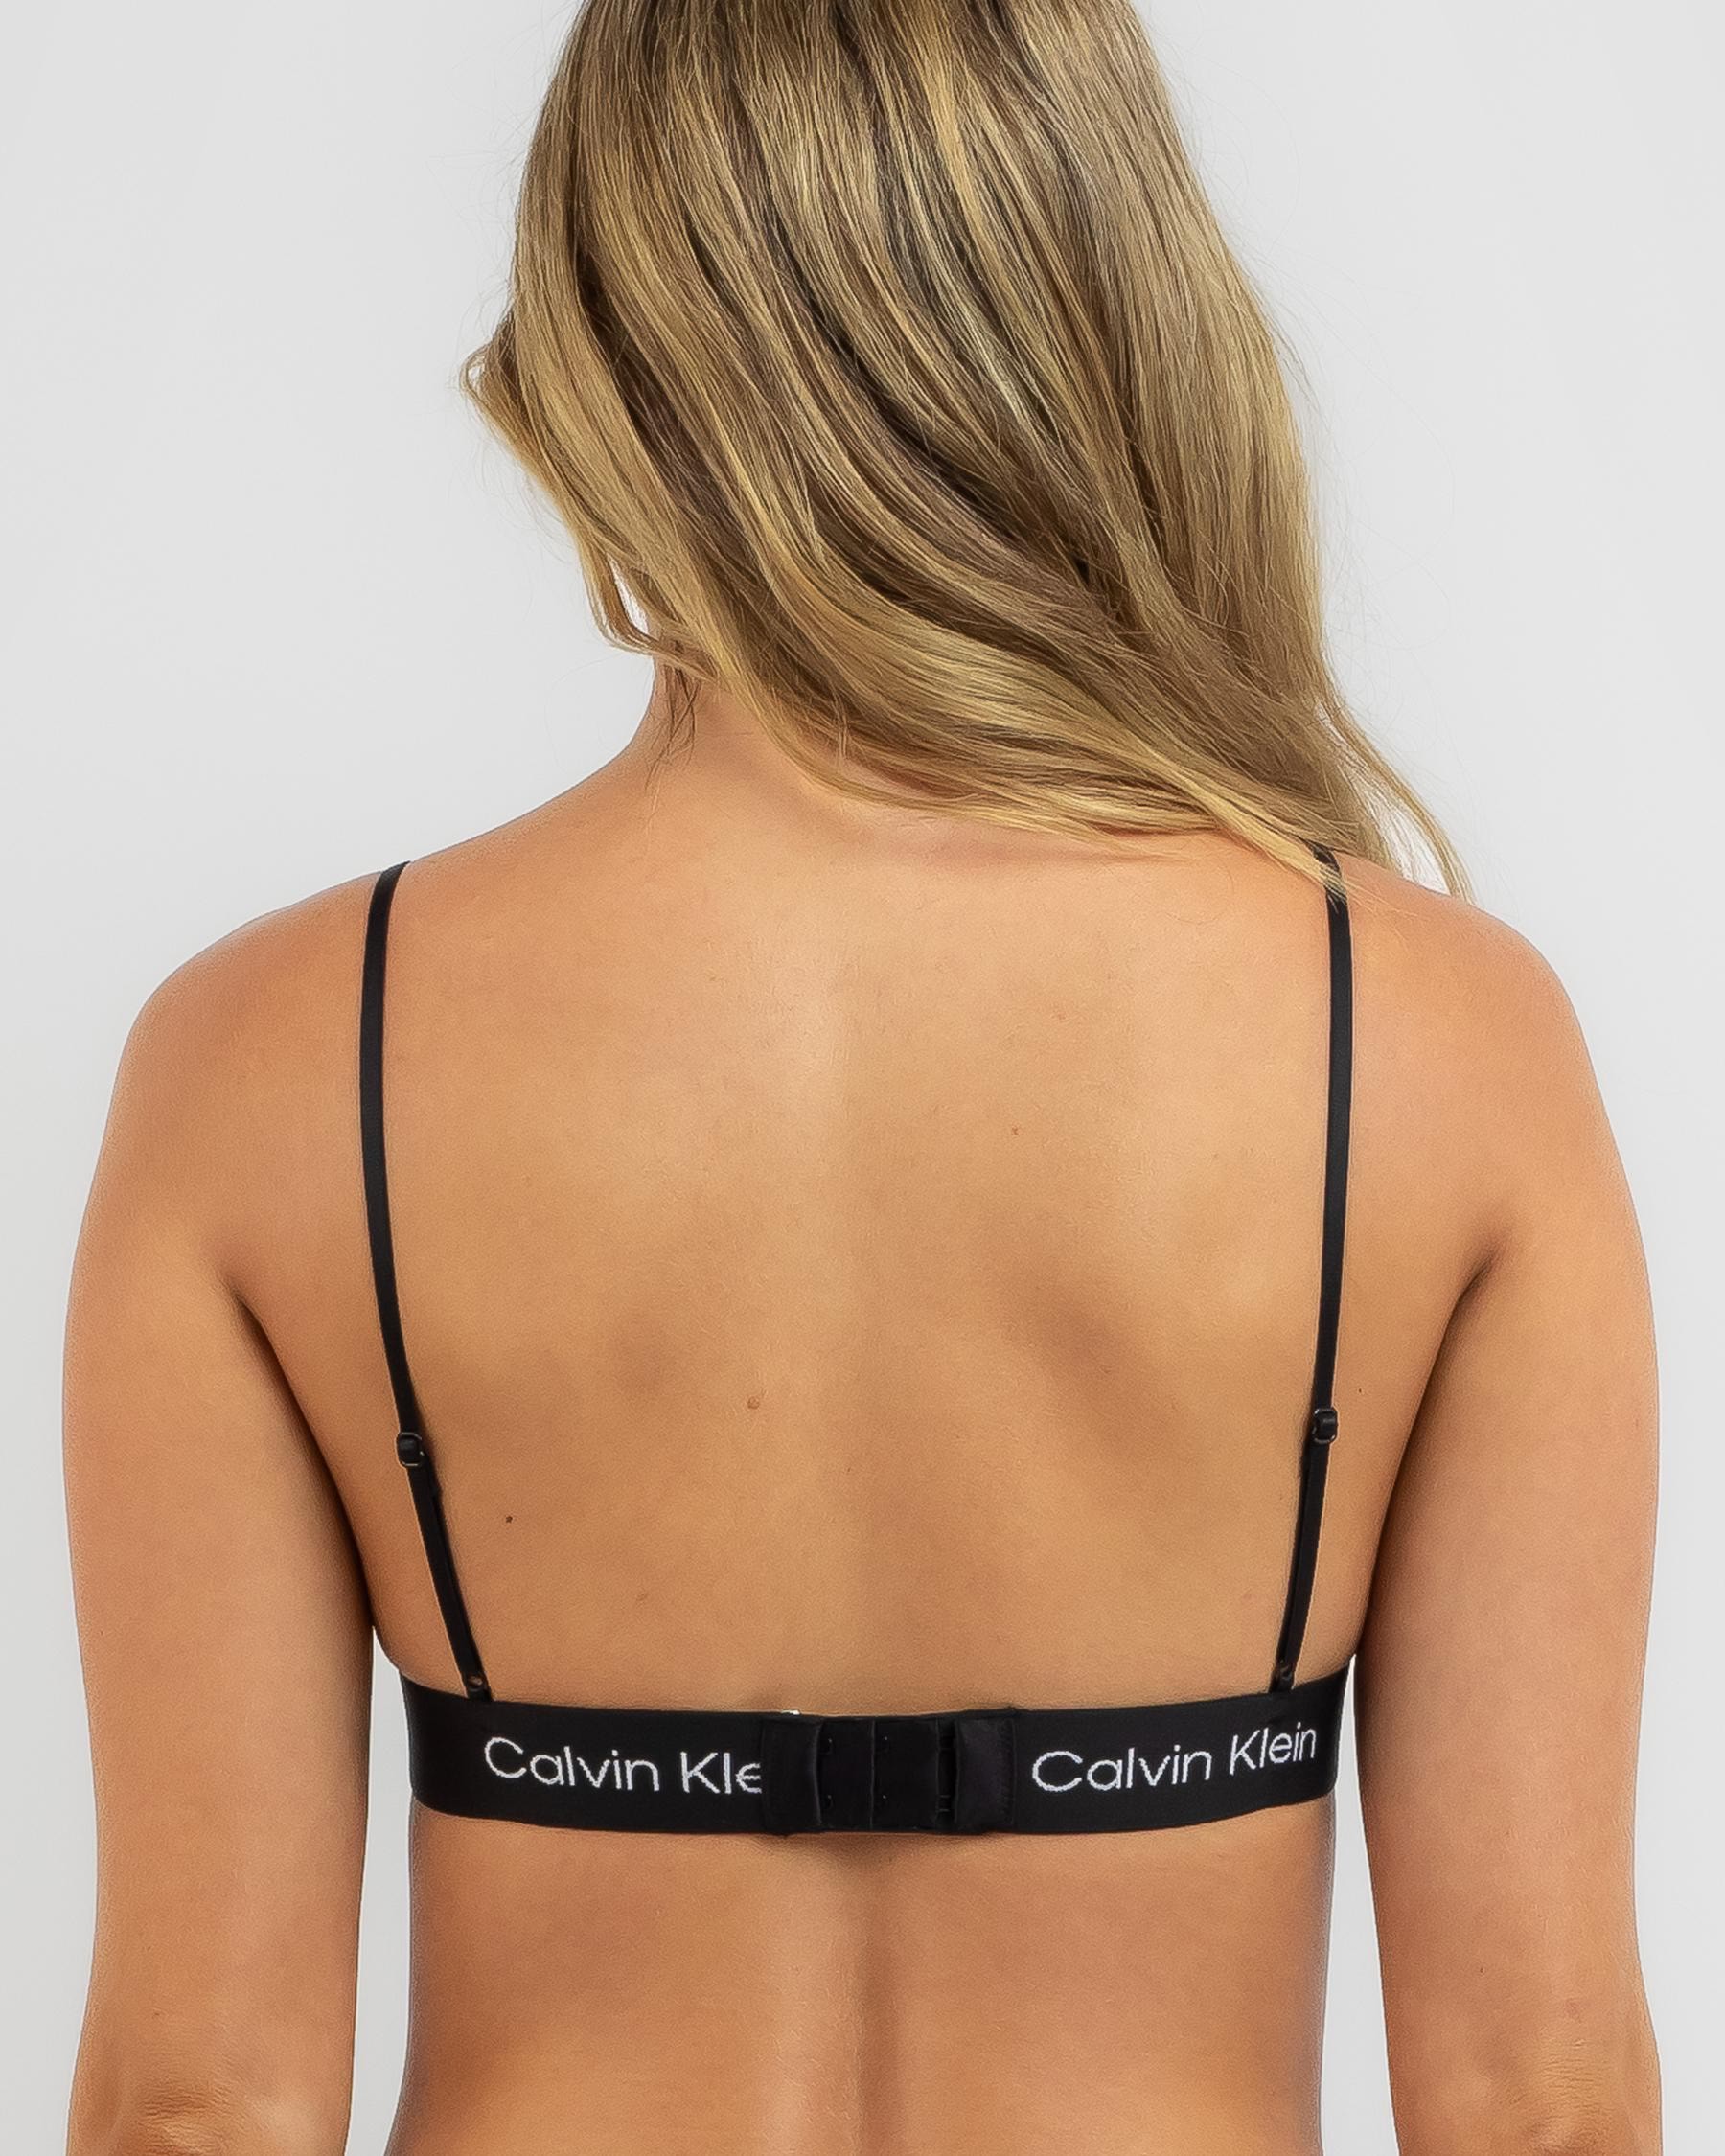 Calvin Klein 1996 Printed Unlined Triangle Bralette